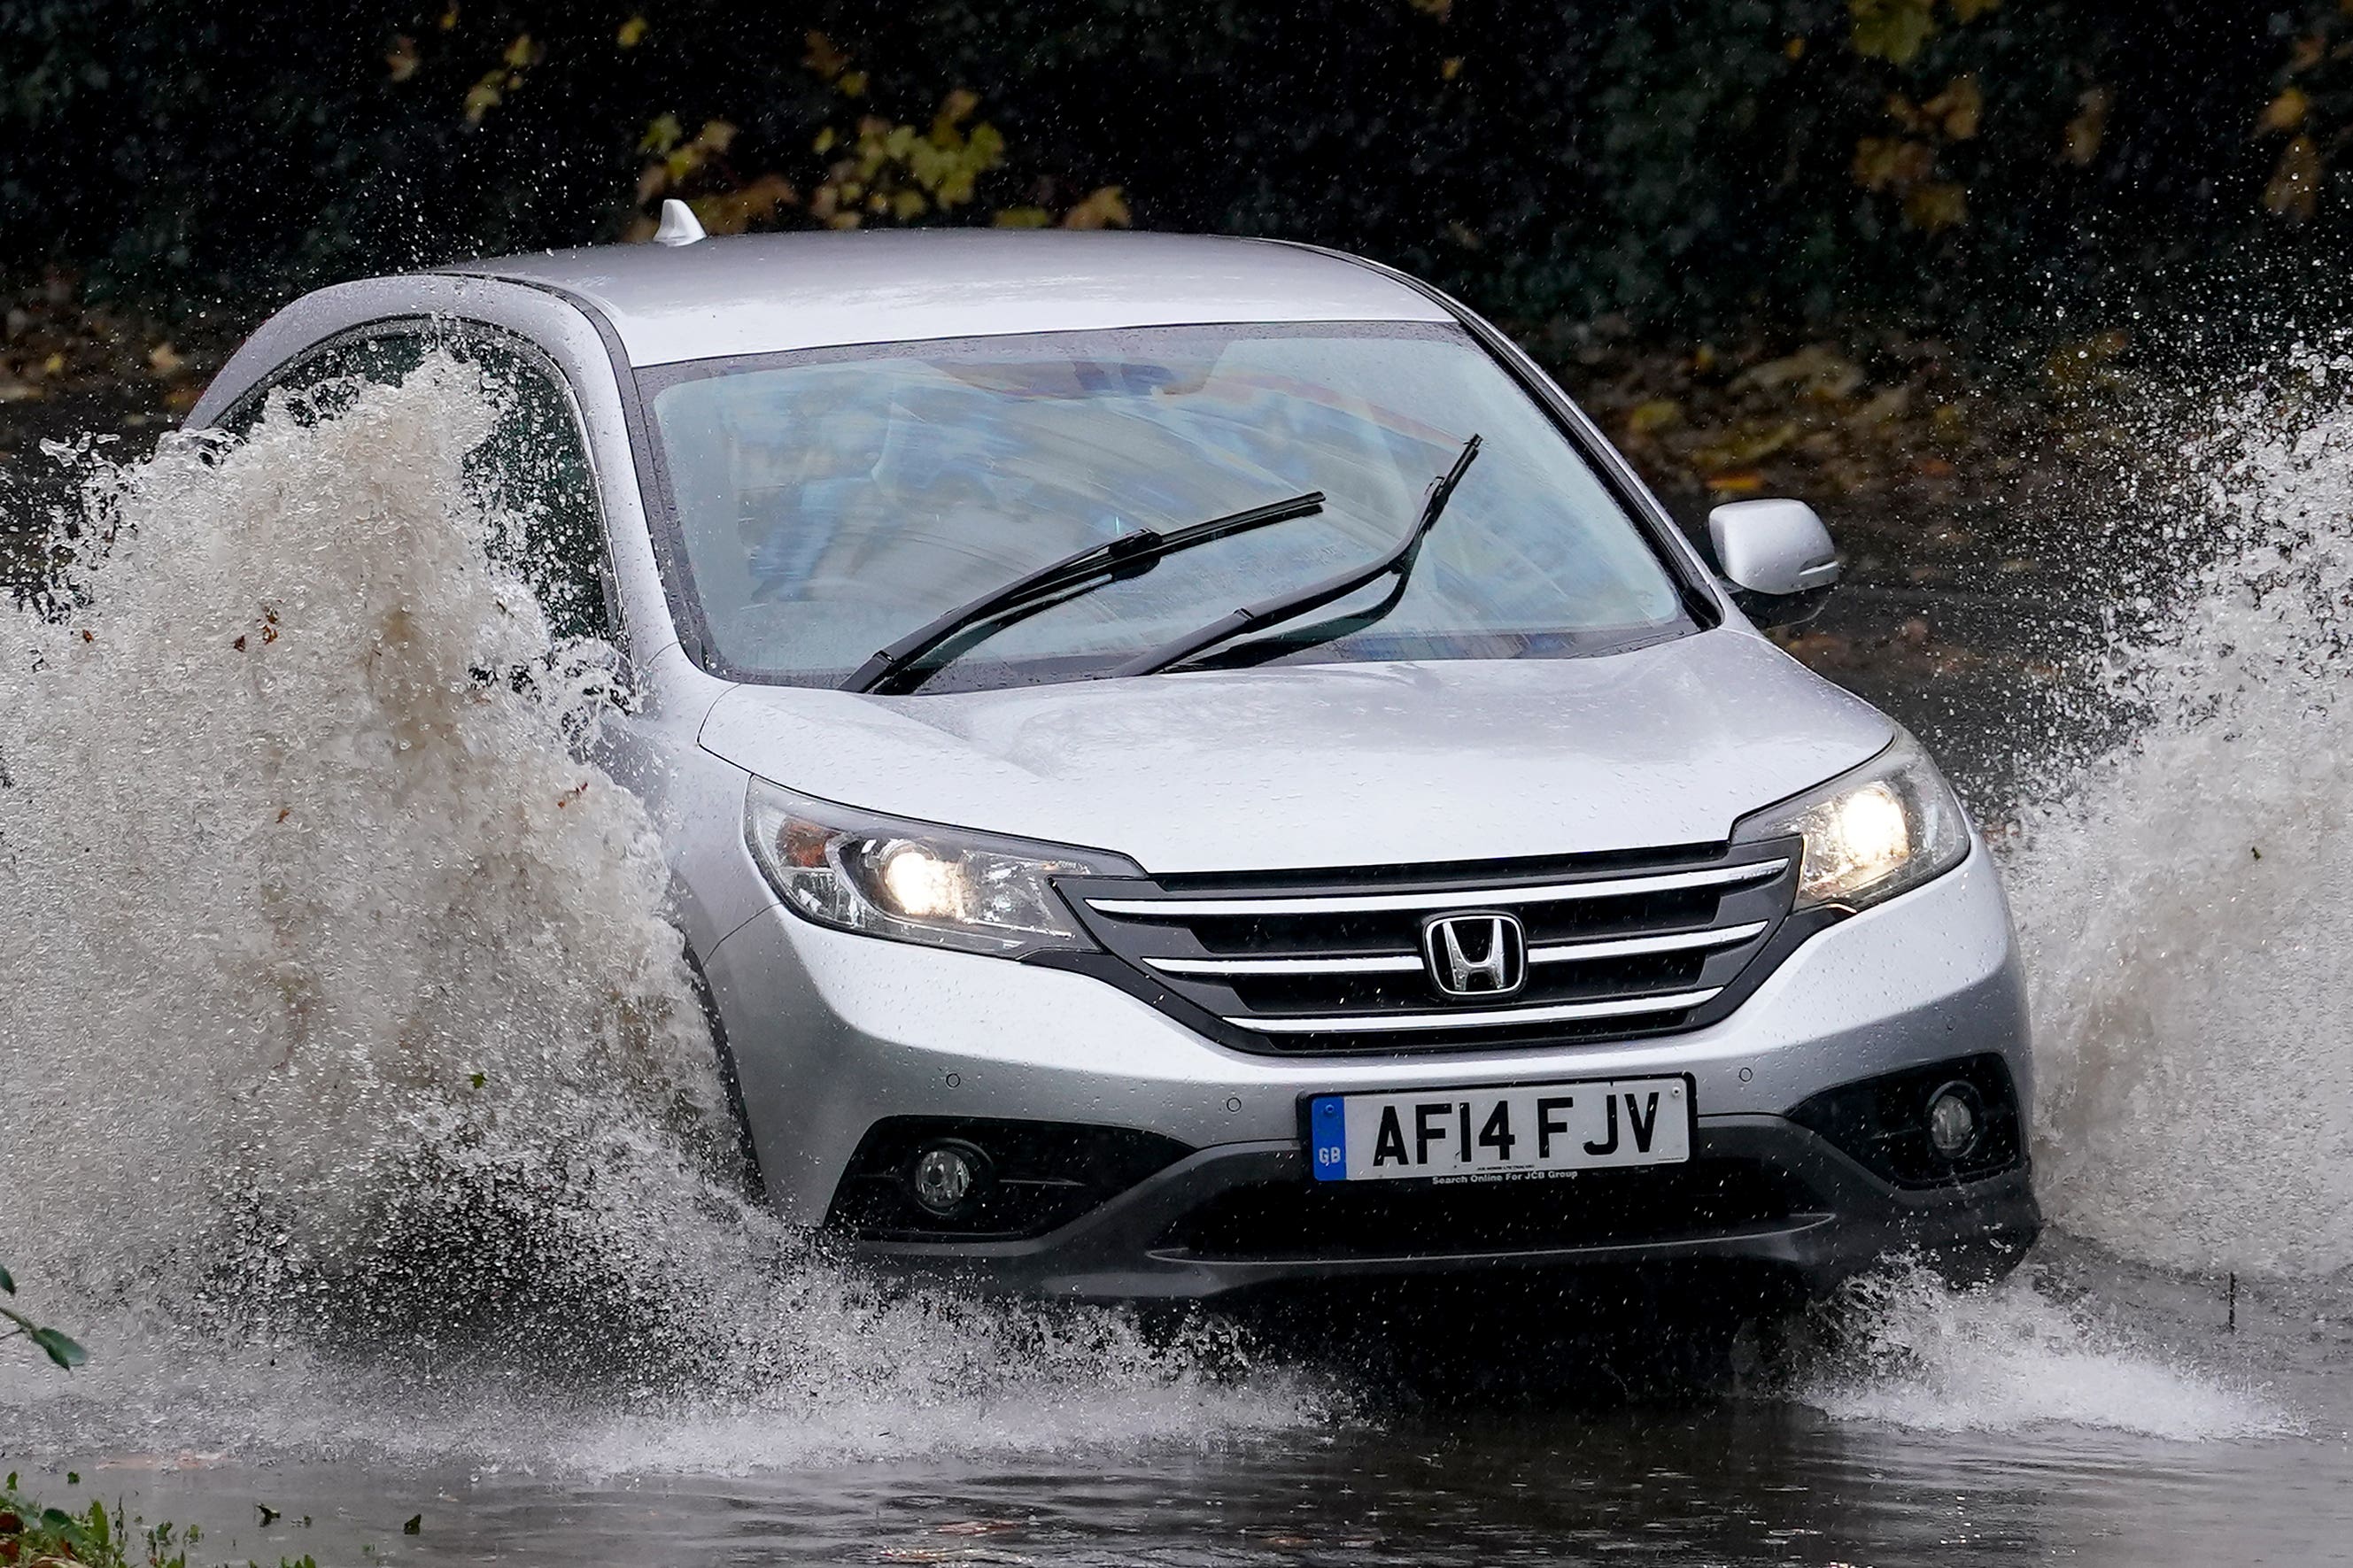 Storm Debi brought heavy rainfall in Kent on Tuesday (Gareth Fuller/PA)